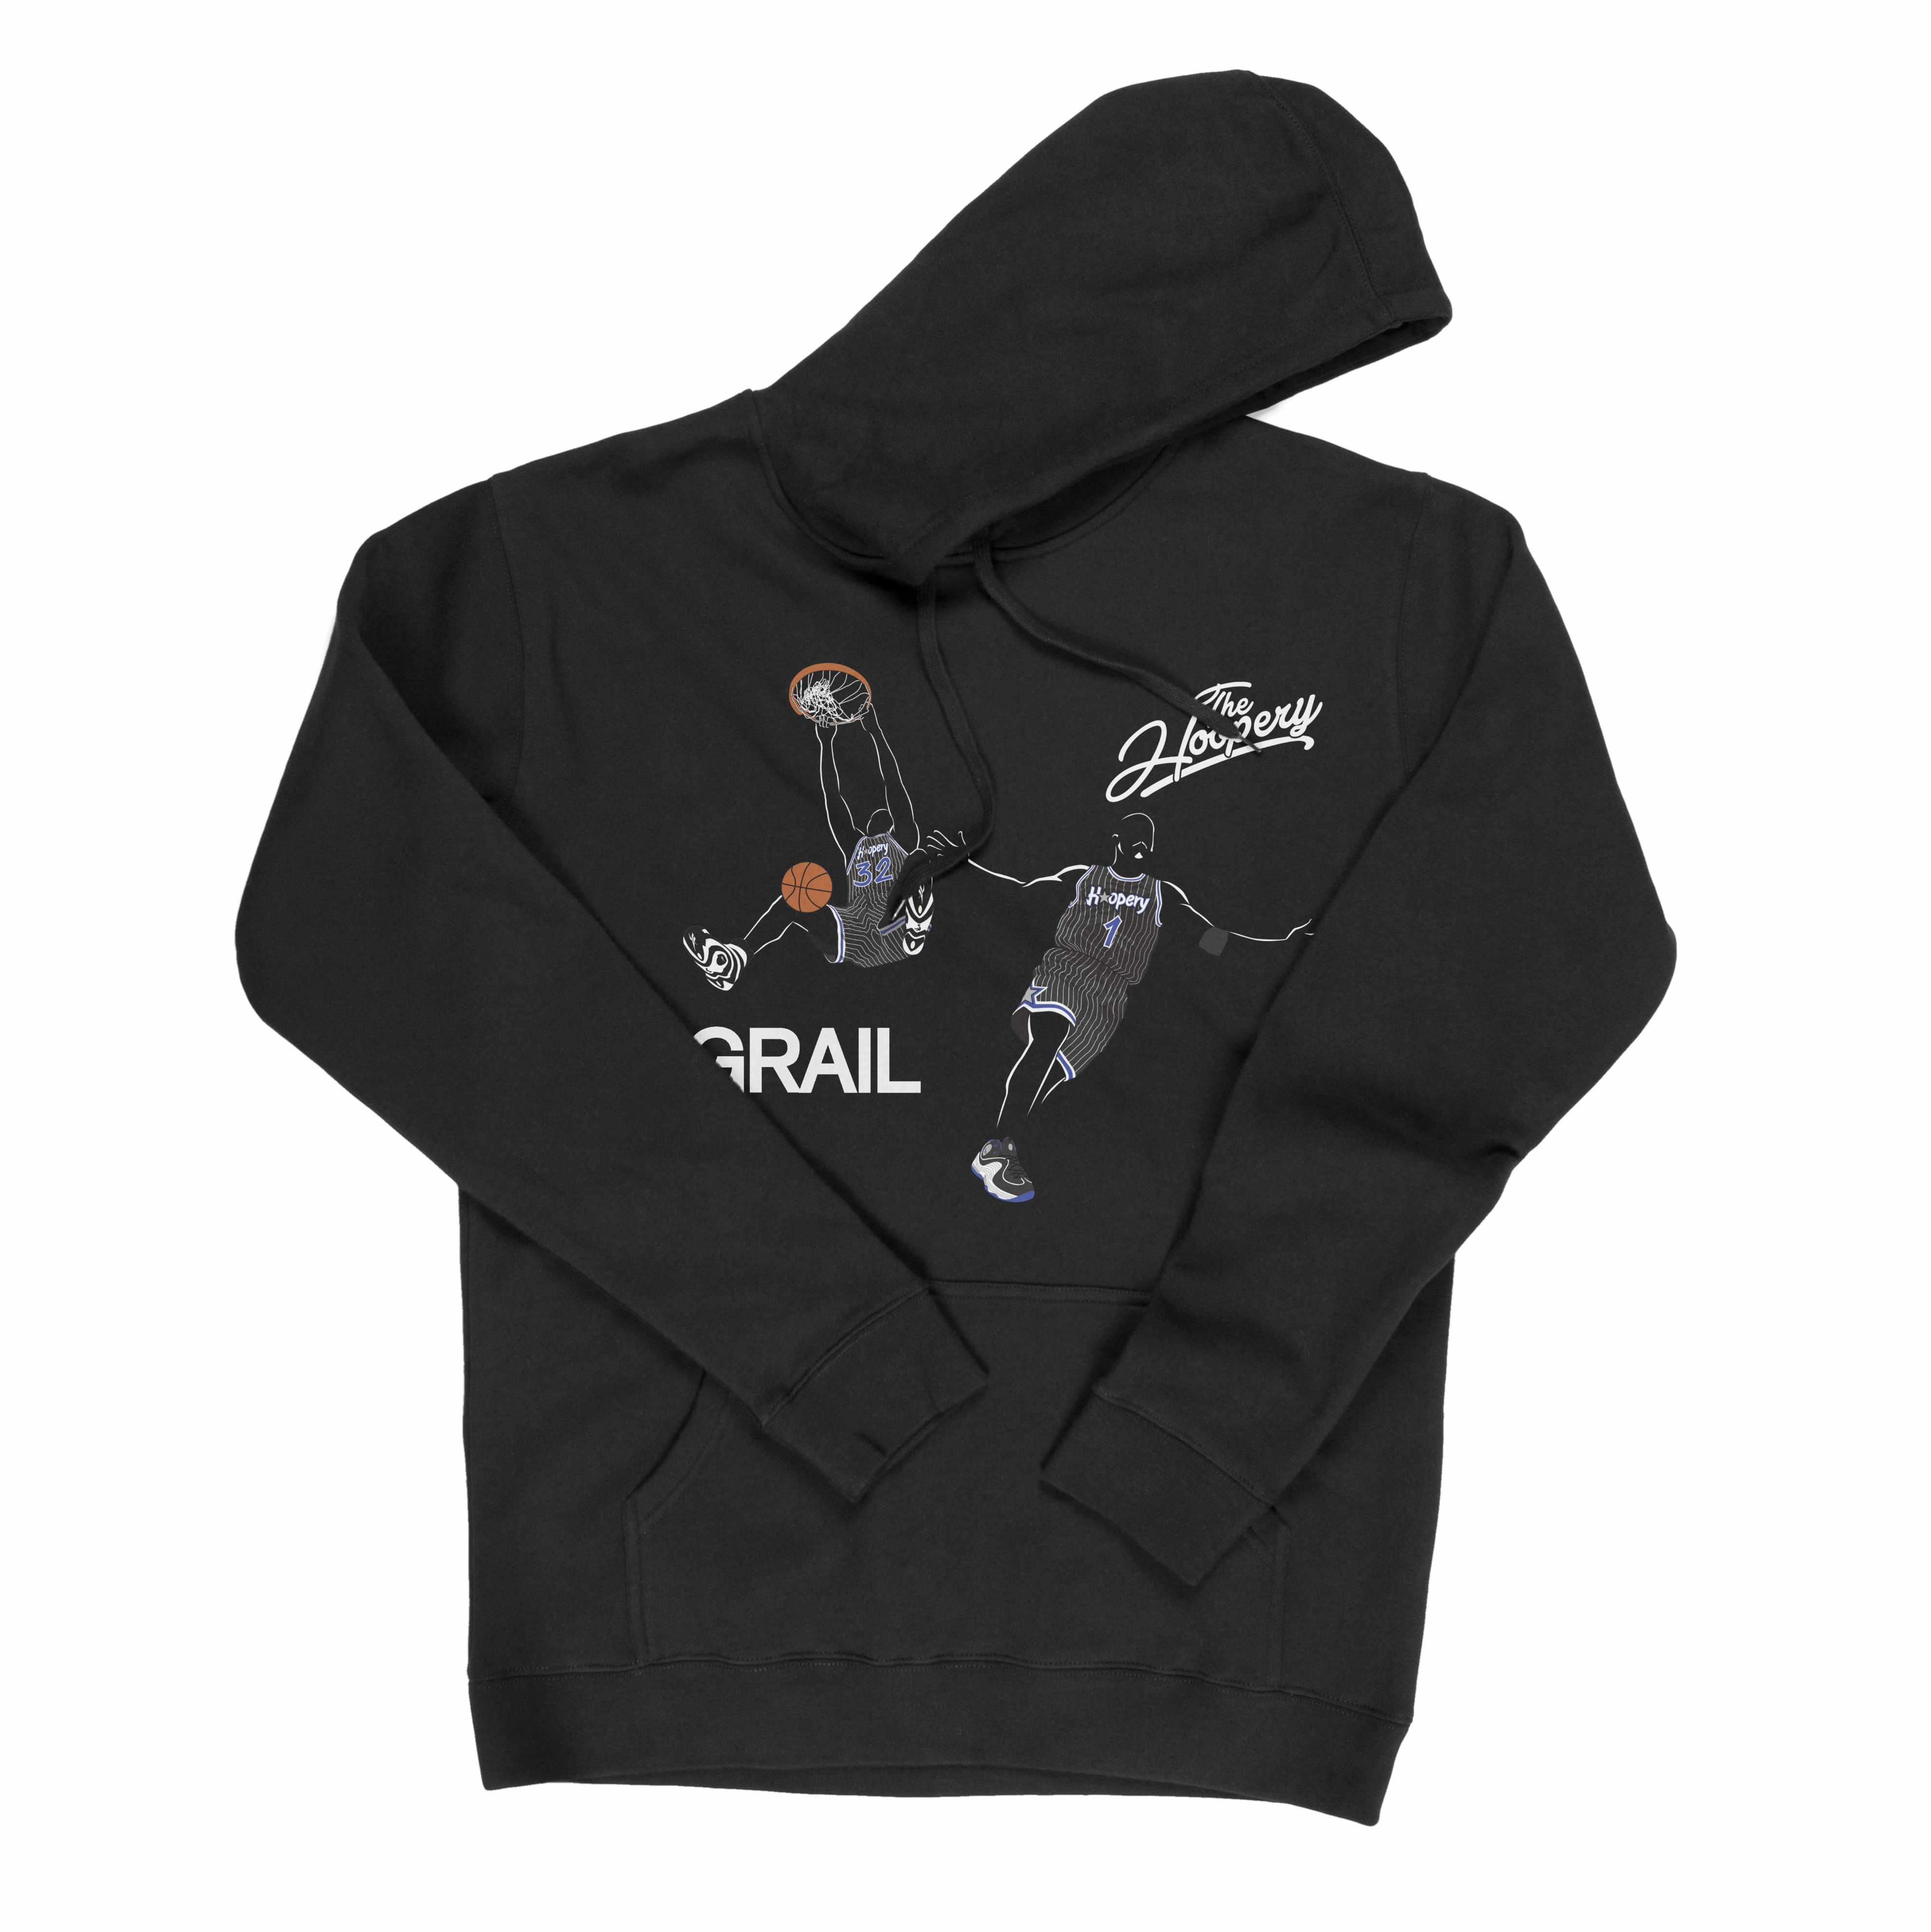 Grail X Nightwing X Hoopery Collab | Dynamic Duo Hoodie | Collaboration | Sneaker Match | Jordan Matching Outfits